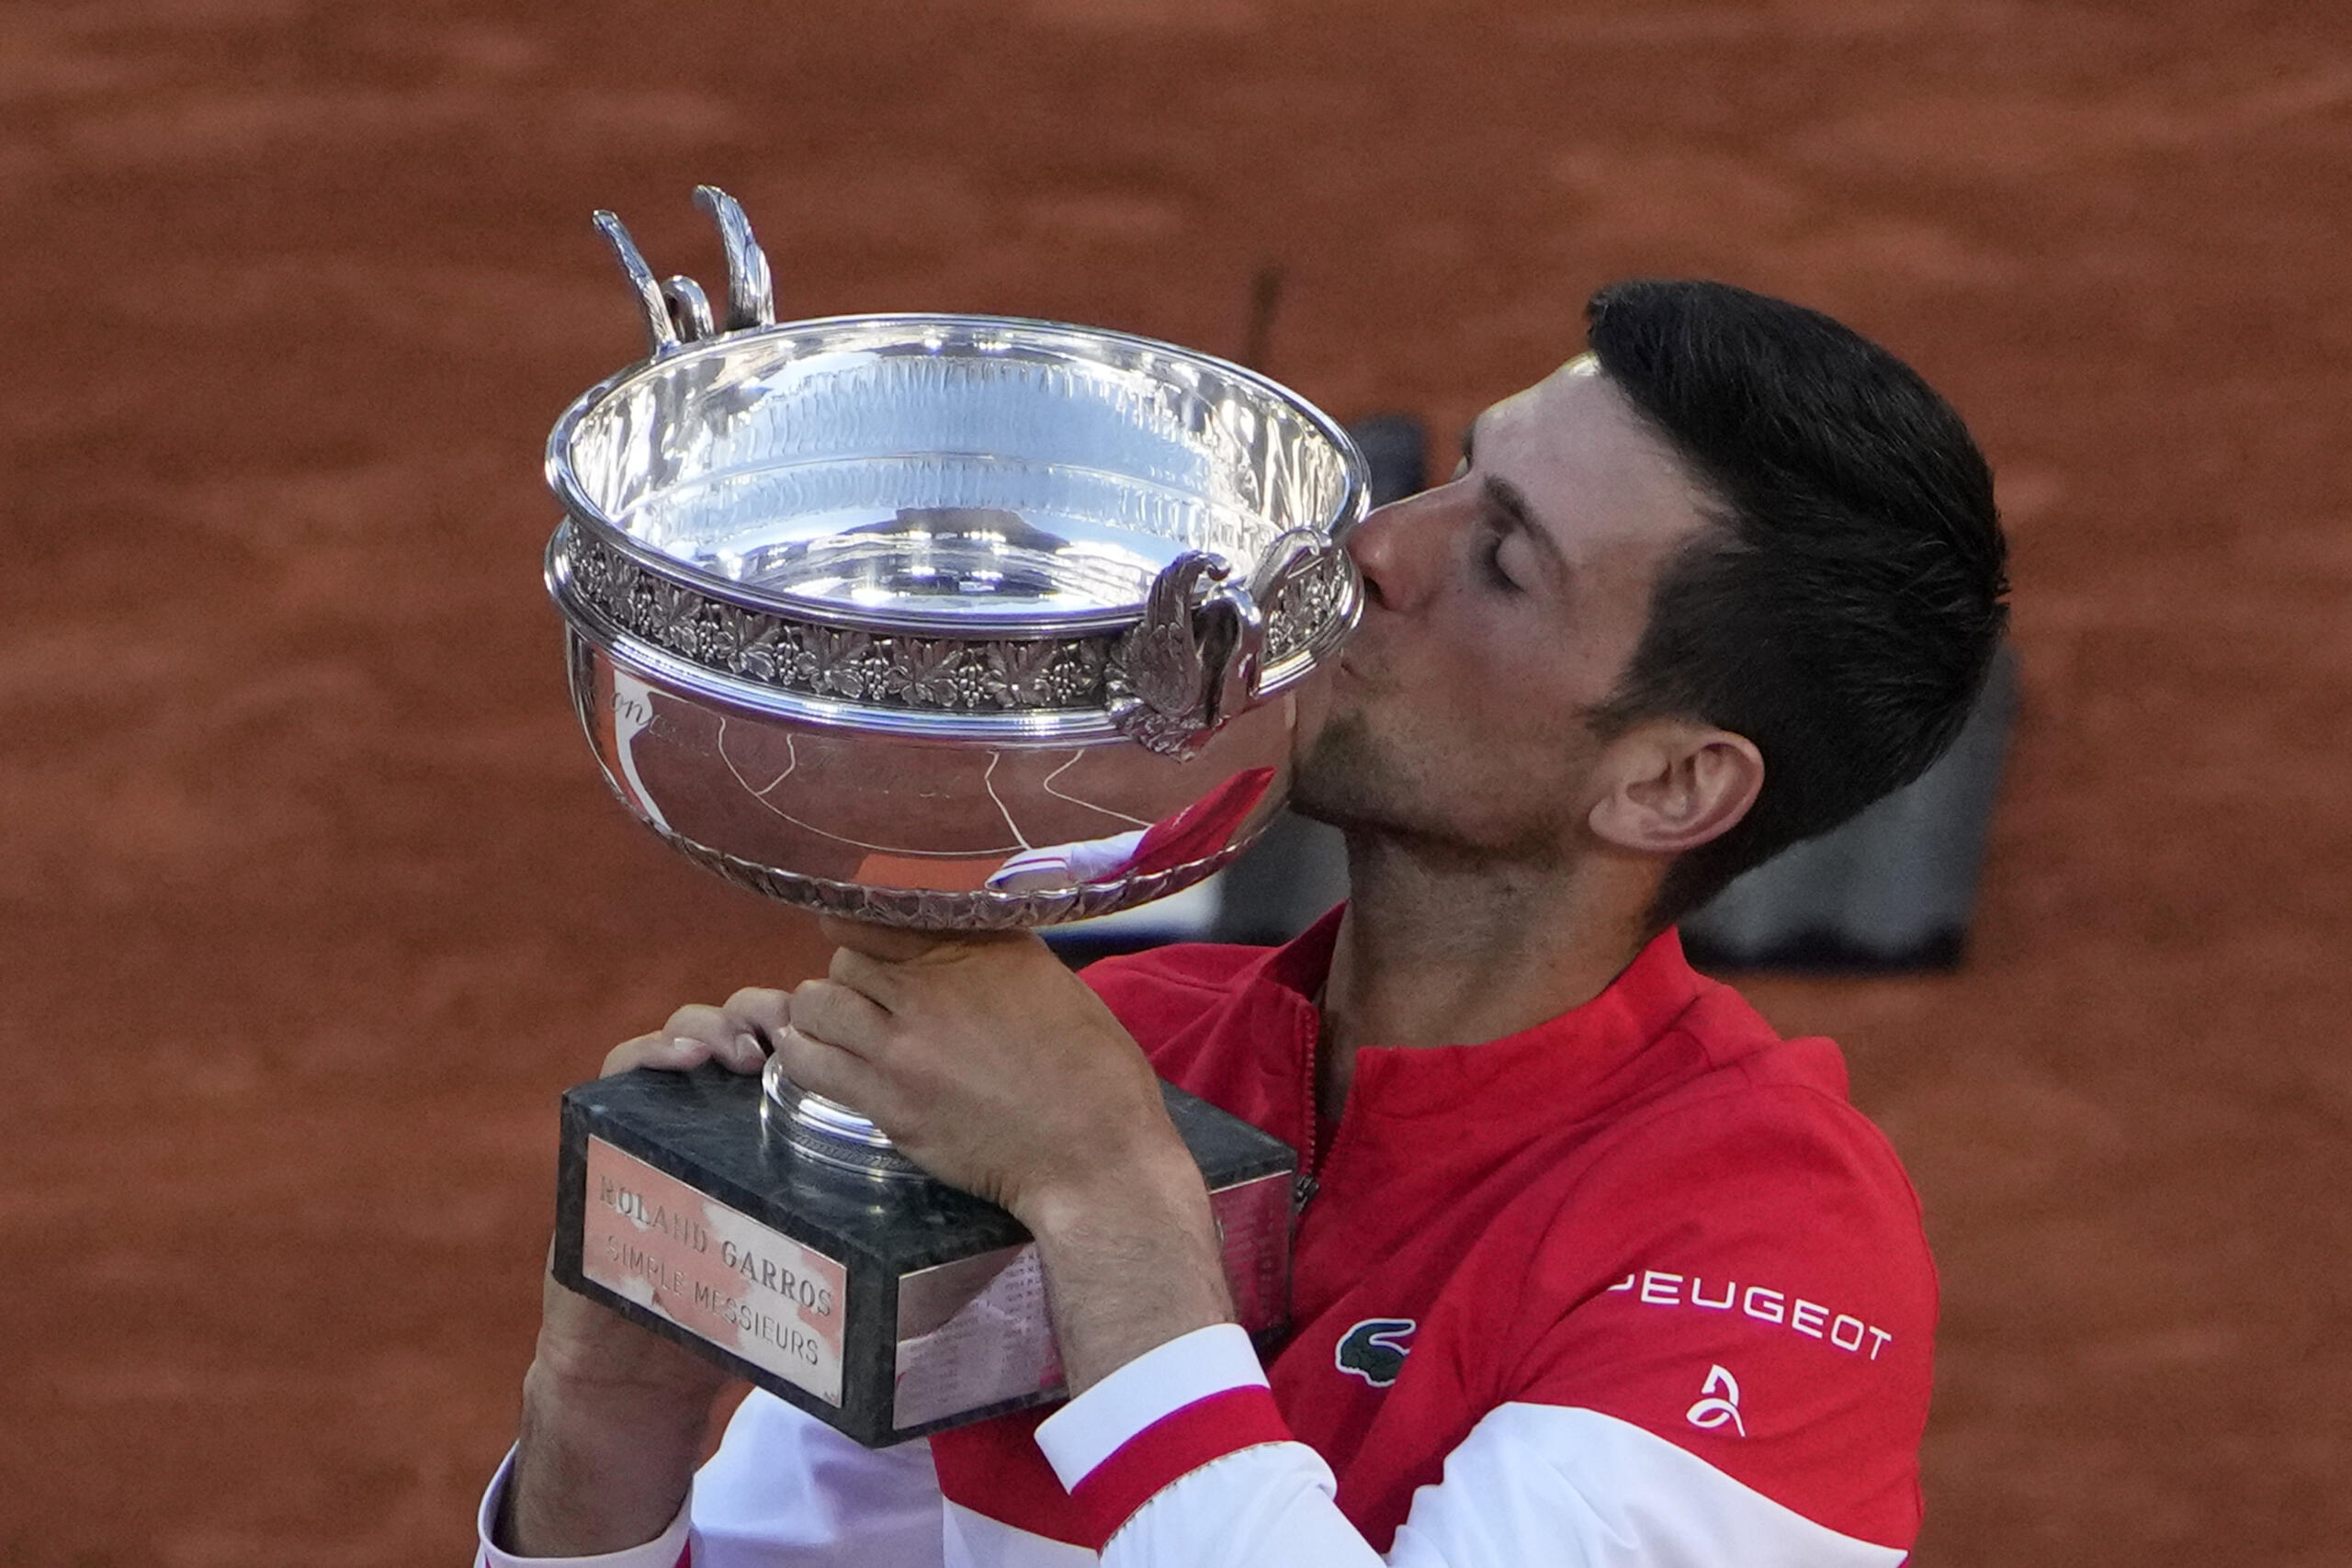 Serbia's Novak Djokovic kisses the cup after defeating Stefanos Tsitsipas of Greece during their final match of the French Open tennis tournament at the Roland Garros stadium Sunday, June 13, 2021 in Paris. Djokovic won 6-7, 2-6, 6-3, 6-2, 6-4.